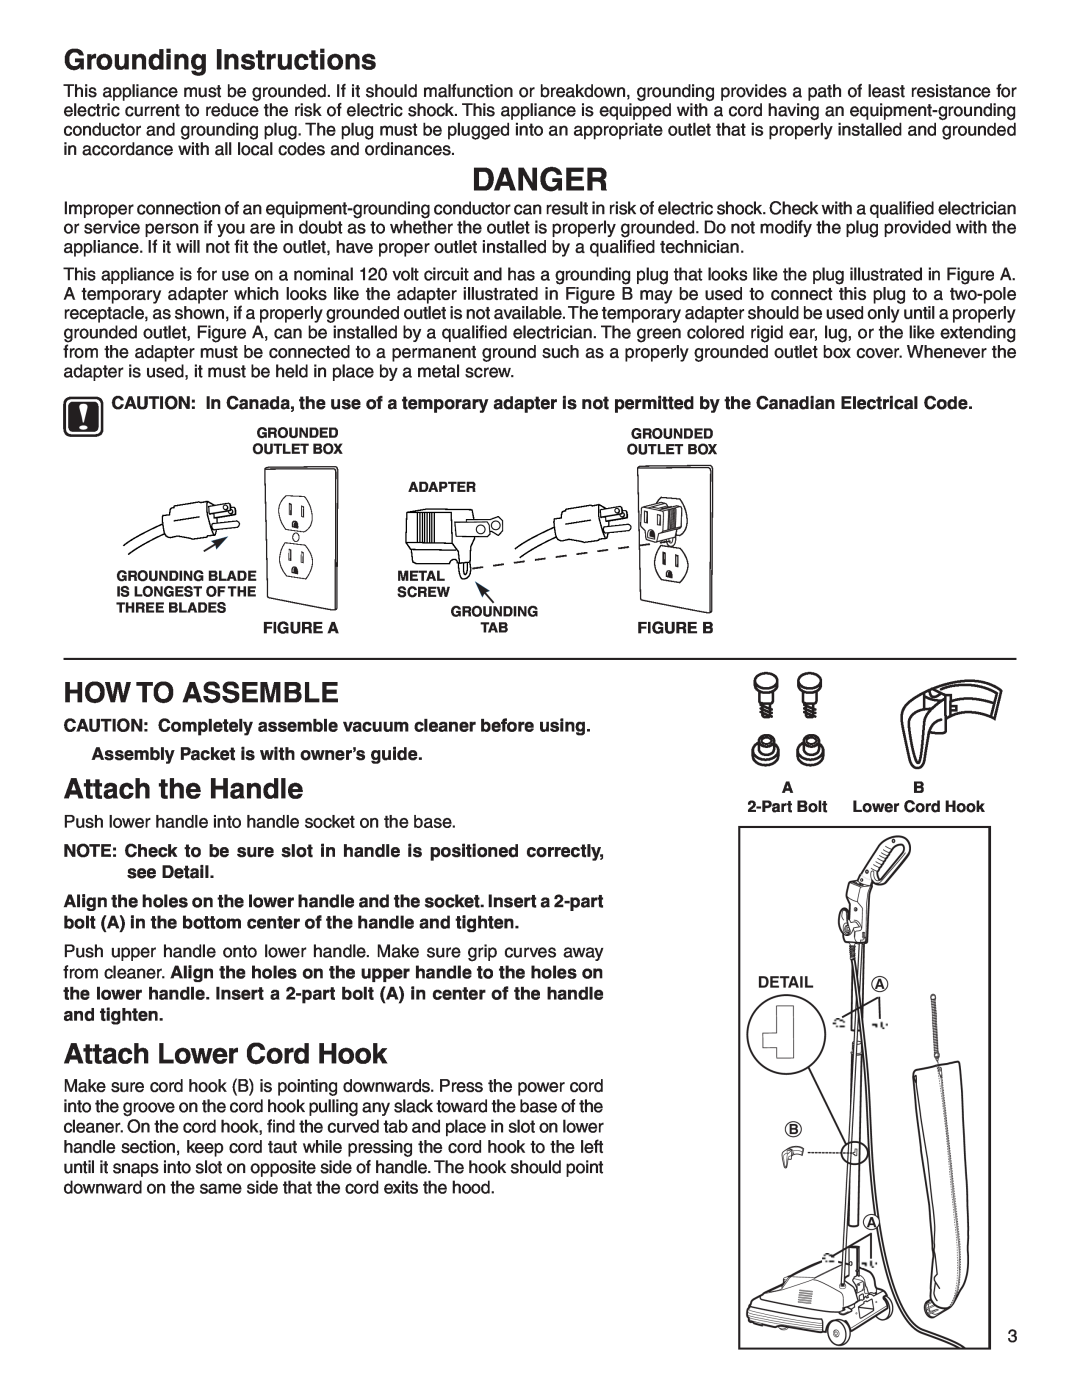 Sanitaire 800 warranty Danger, Grounding Instructions, How To Assemble, Attach the Handle, Attach Lower Cord Hook 